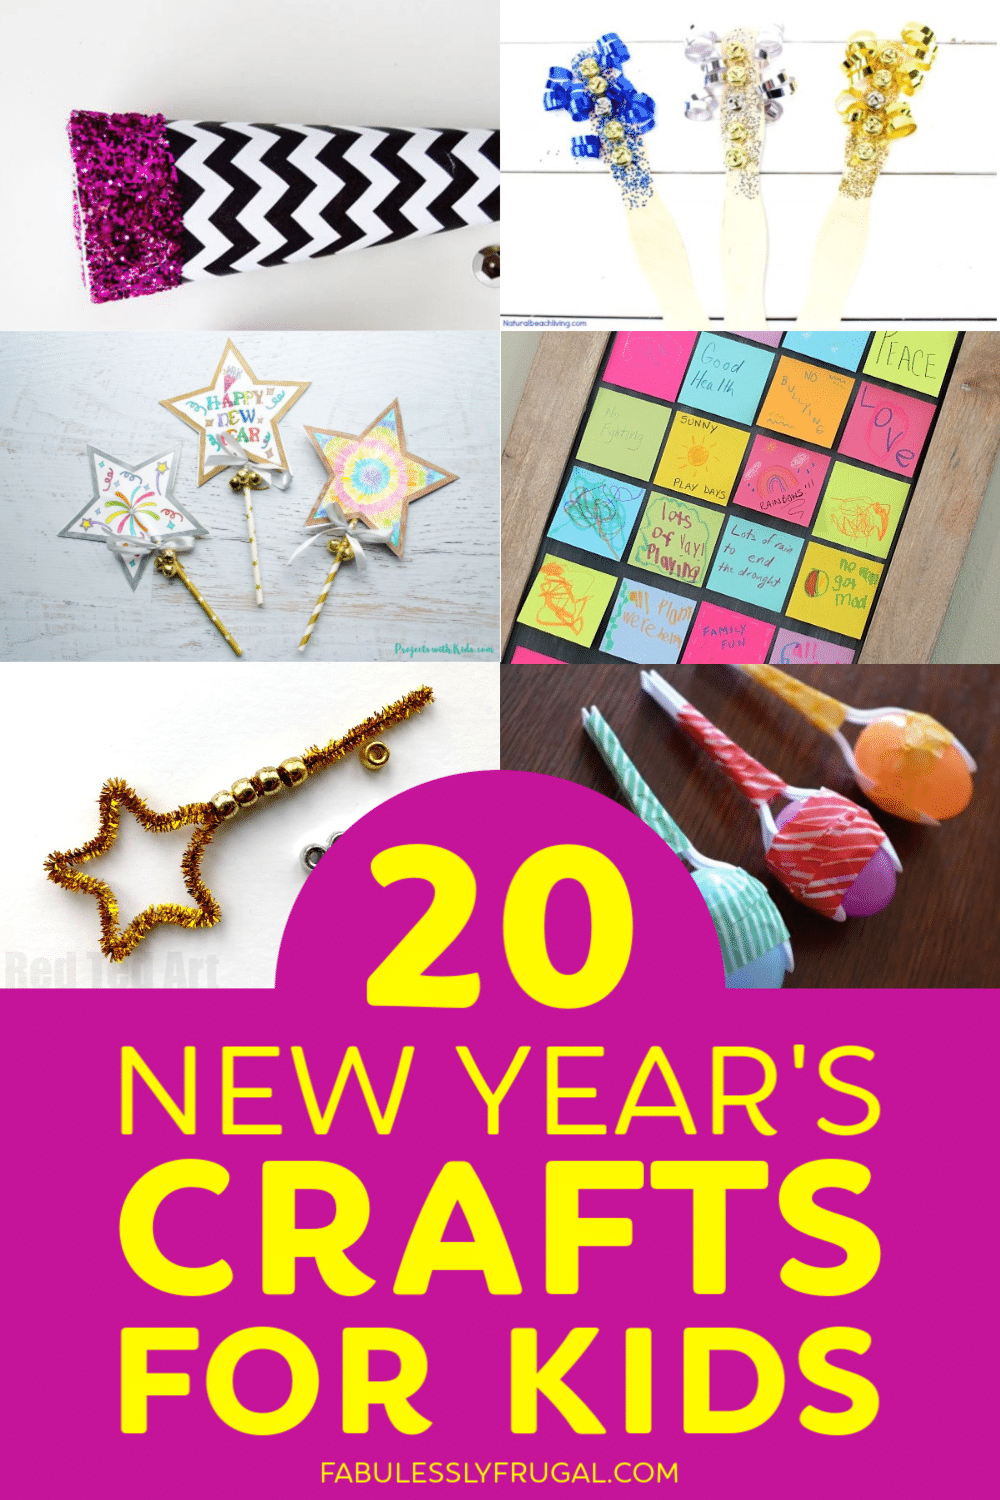 New Year's crafts for kids